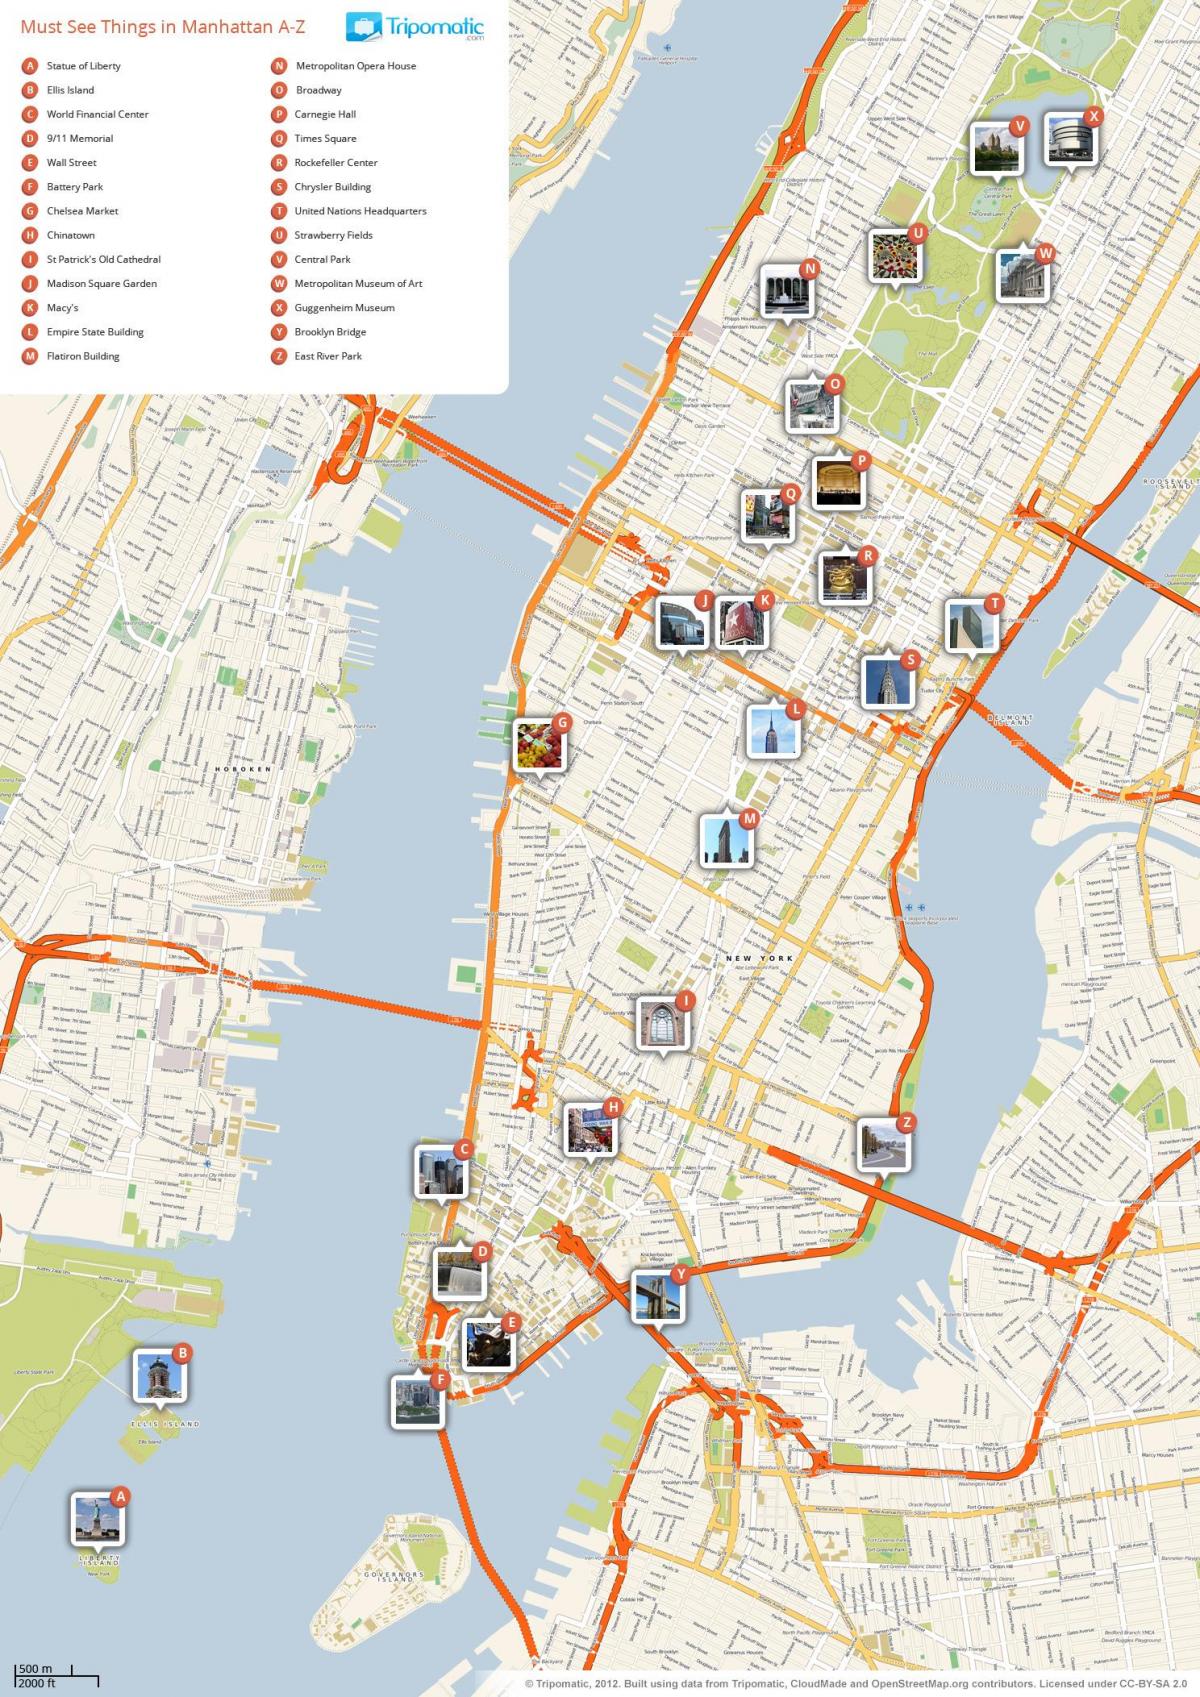 map of Manhattan showing tourist attractions